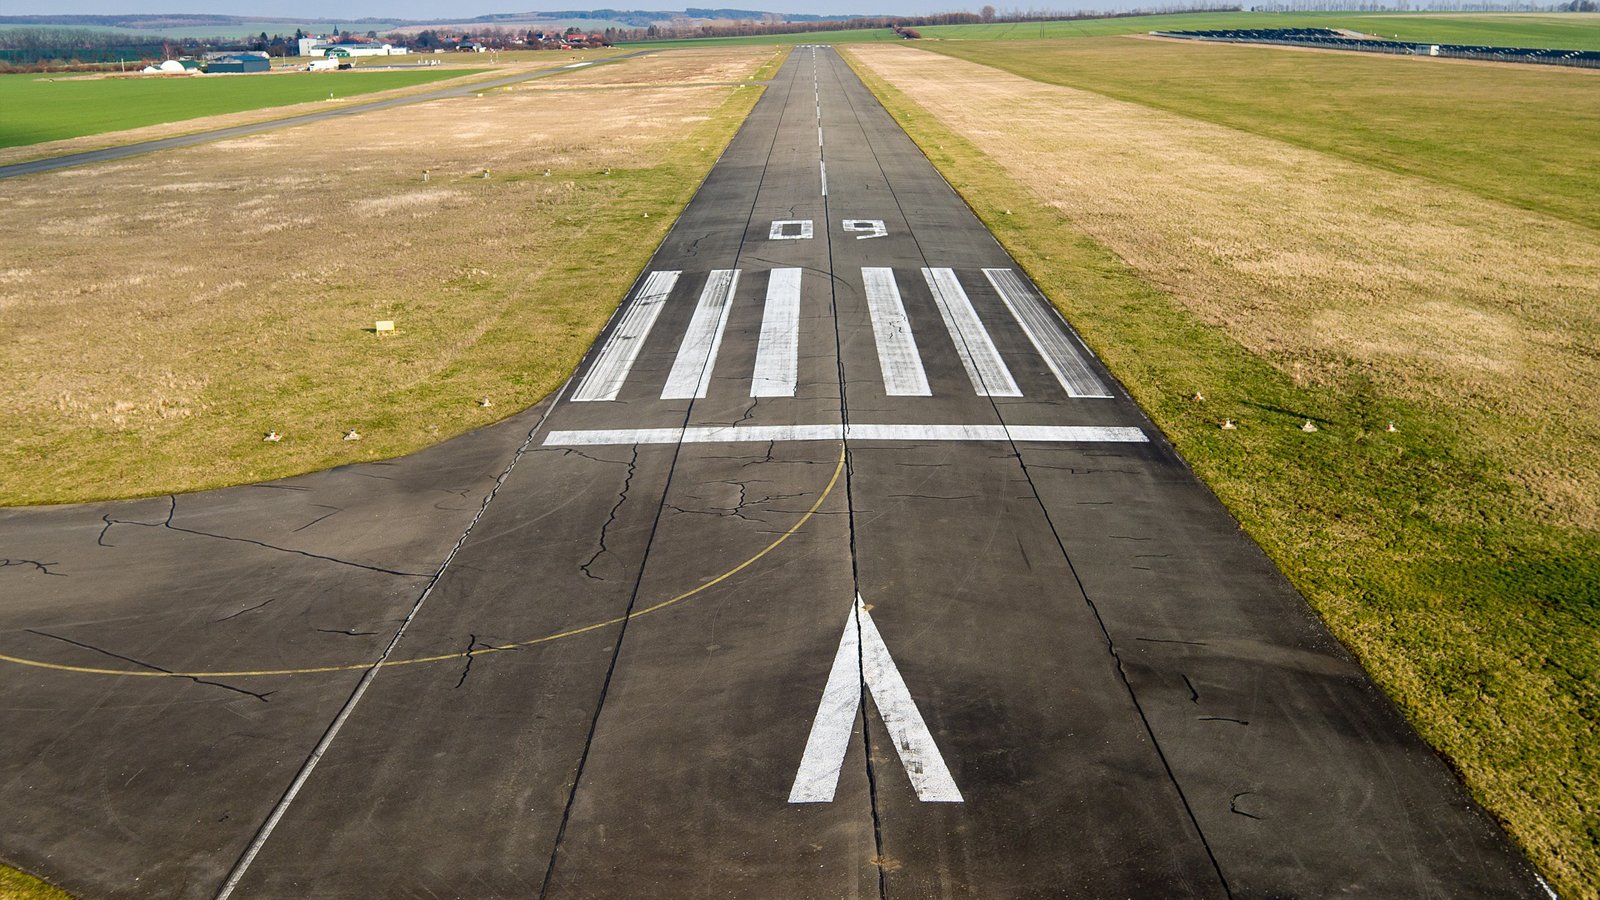 Rajasthan govt plans to develop 23 old airstrips on PPP mode: Tourism Minister